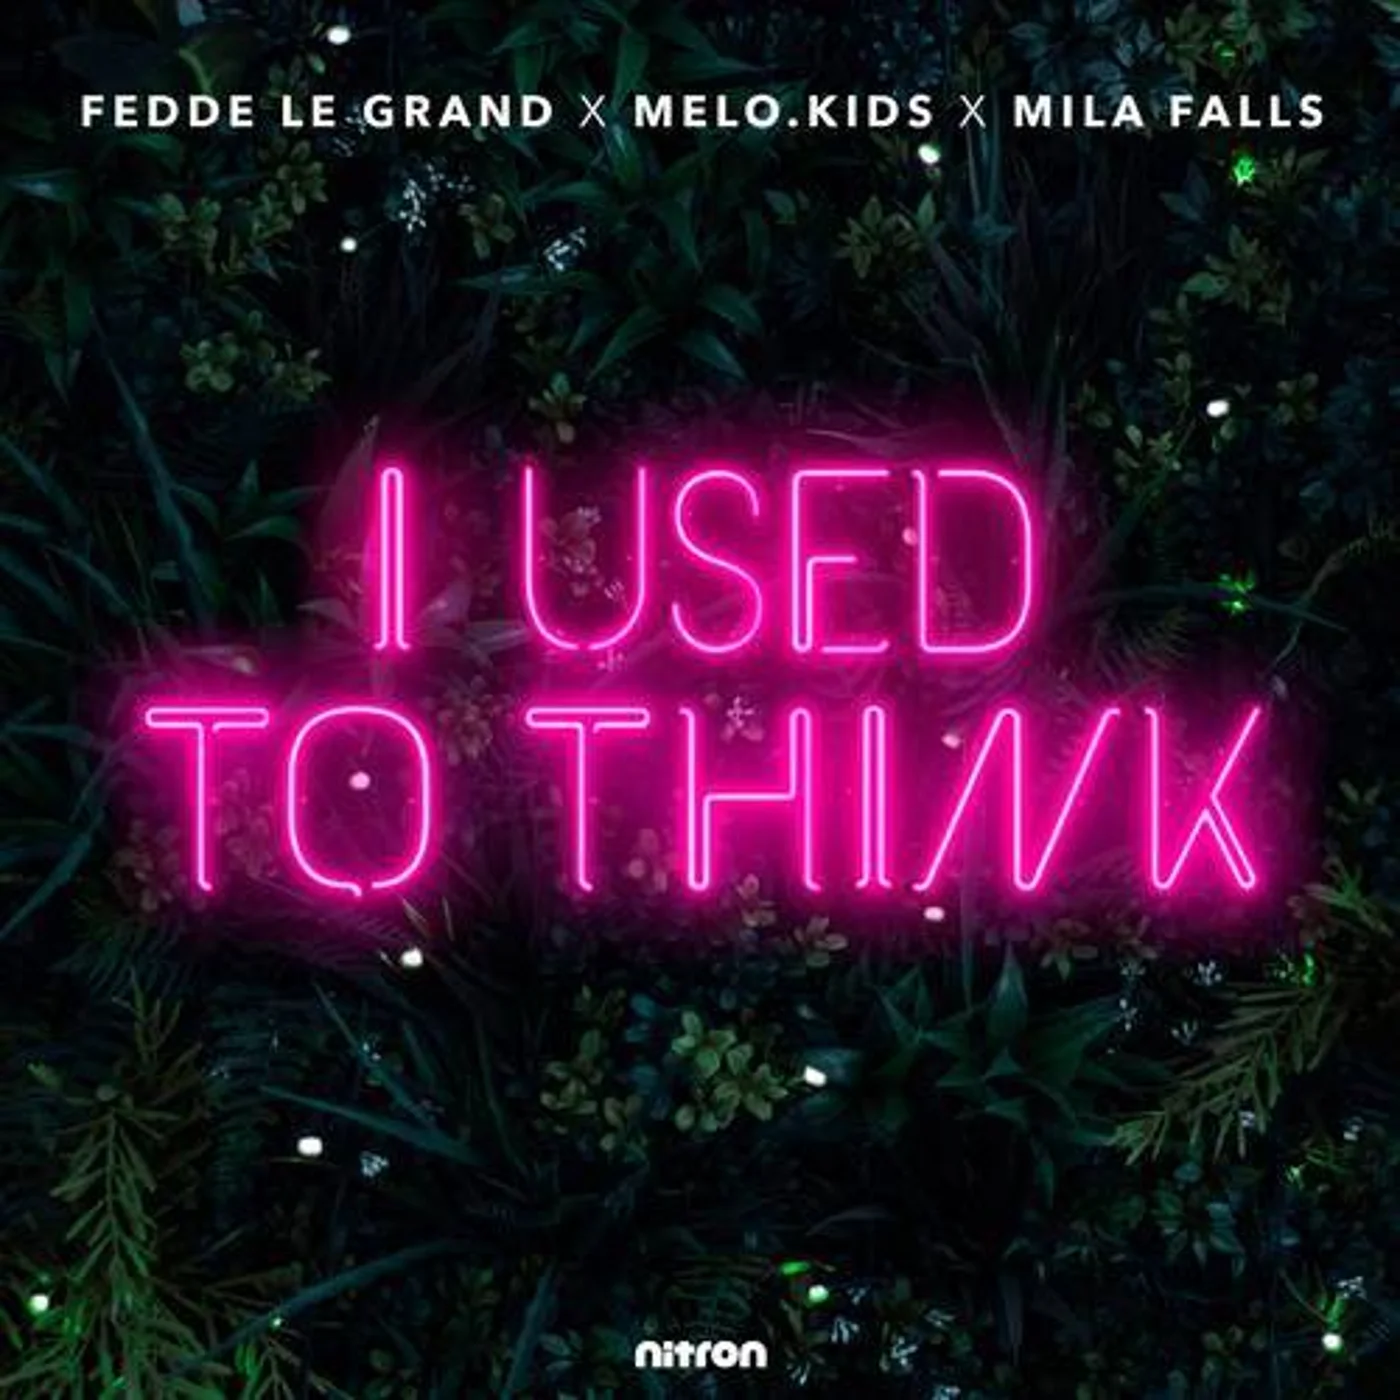 Fedde Le Grand, Melo.Kids, & Mila Falls I Used to Think cover artwork